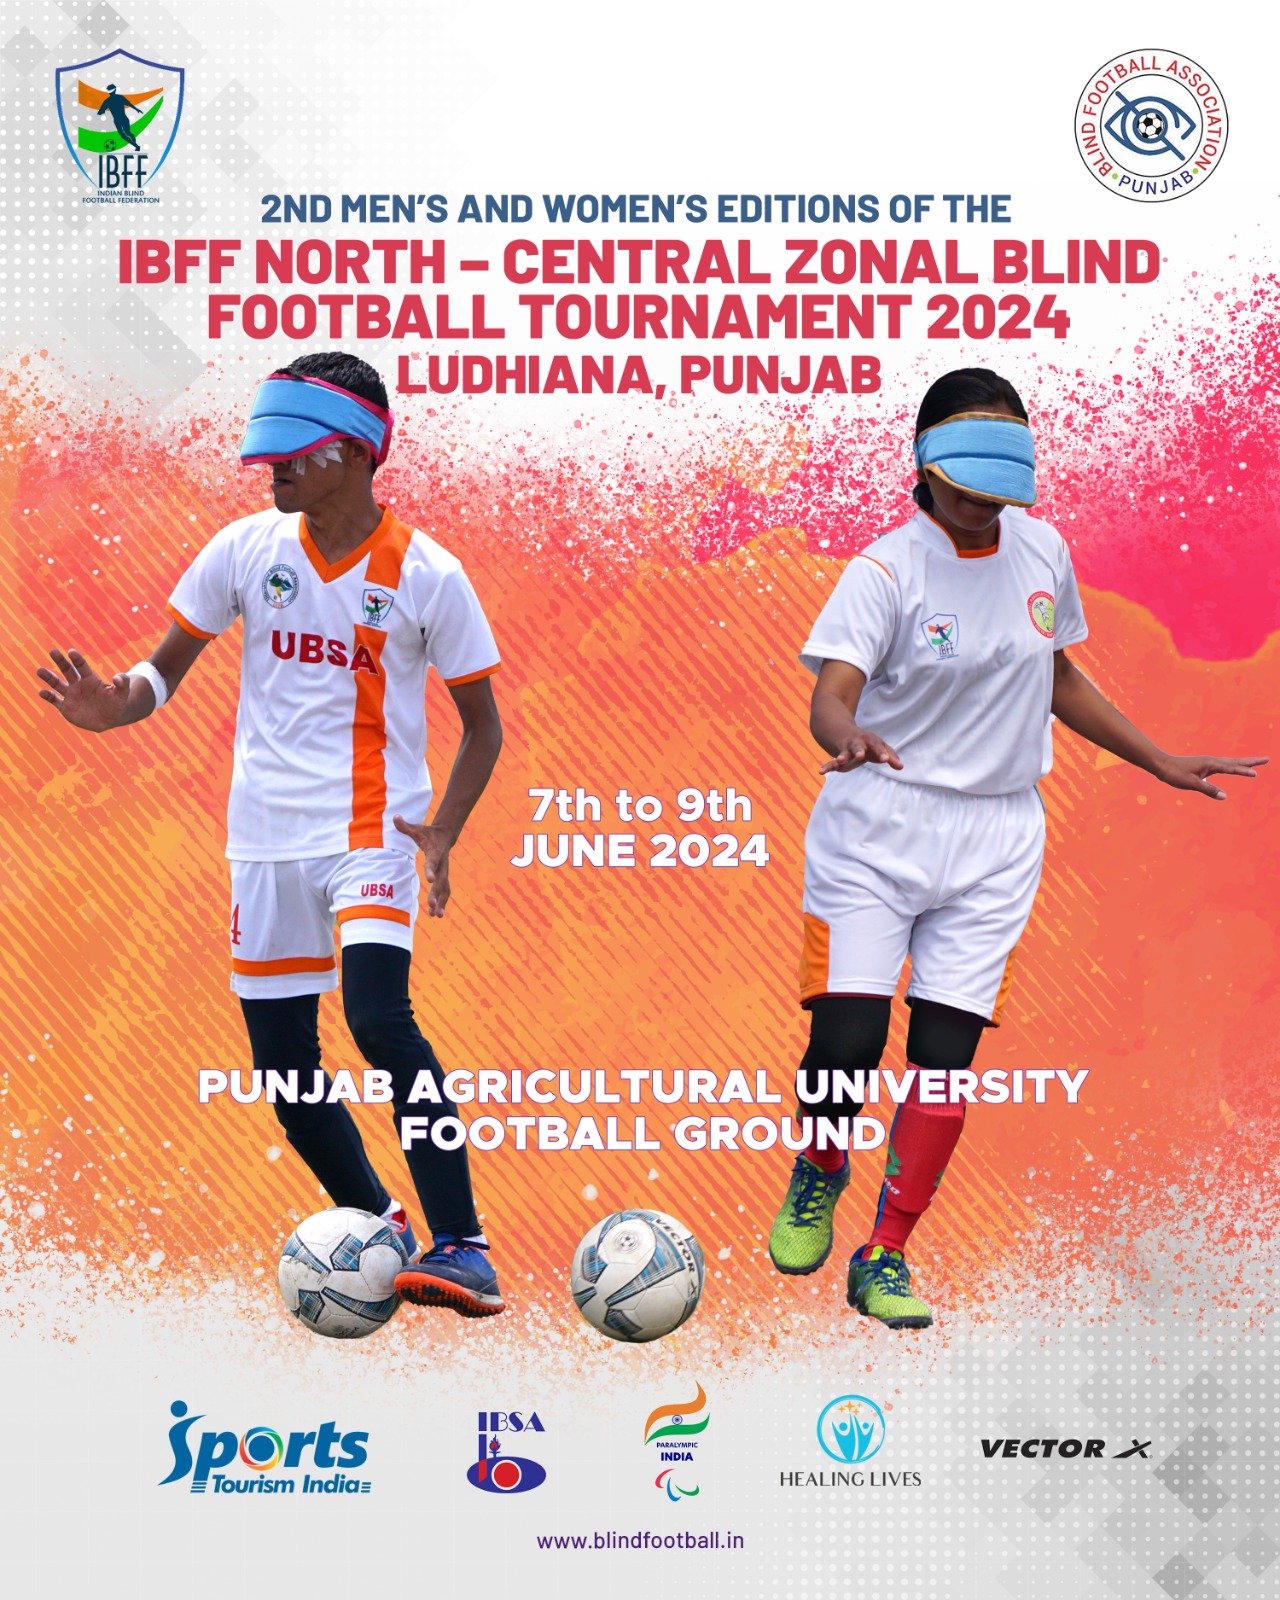 IBFF NORTH CENTRAL ZONAL BLIND FOOTBALL TOURNAMENT 2024 Poster